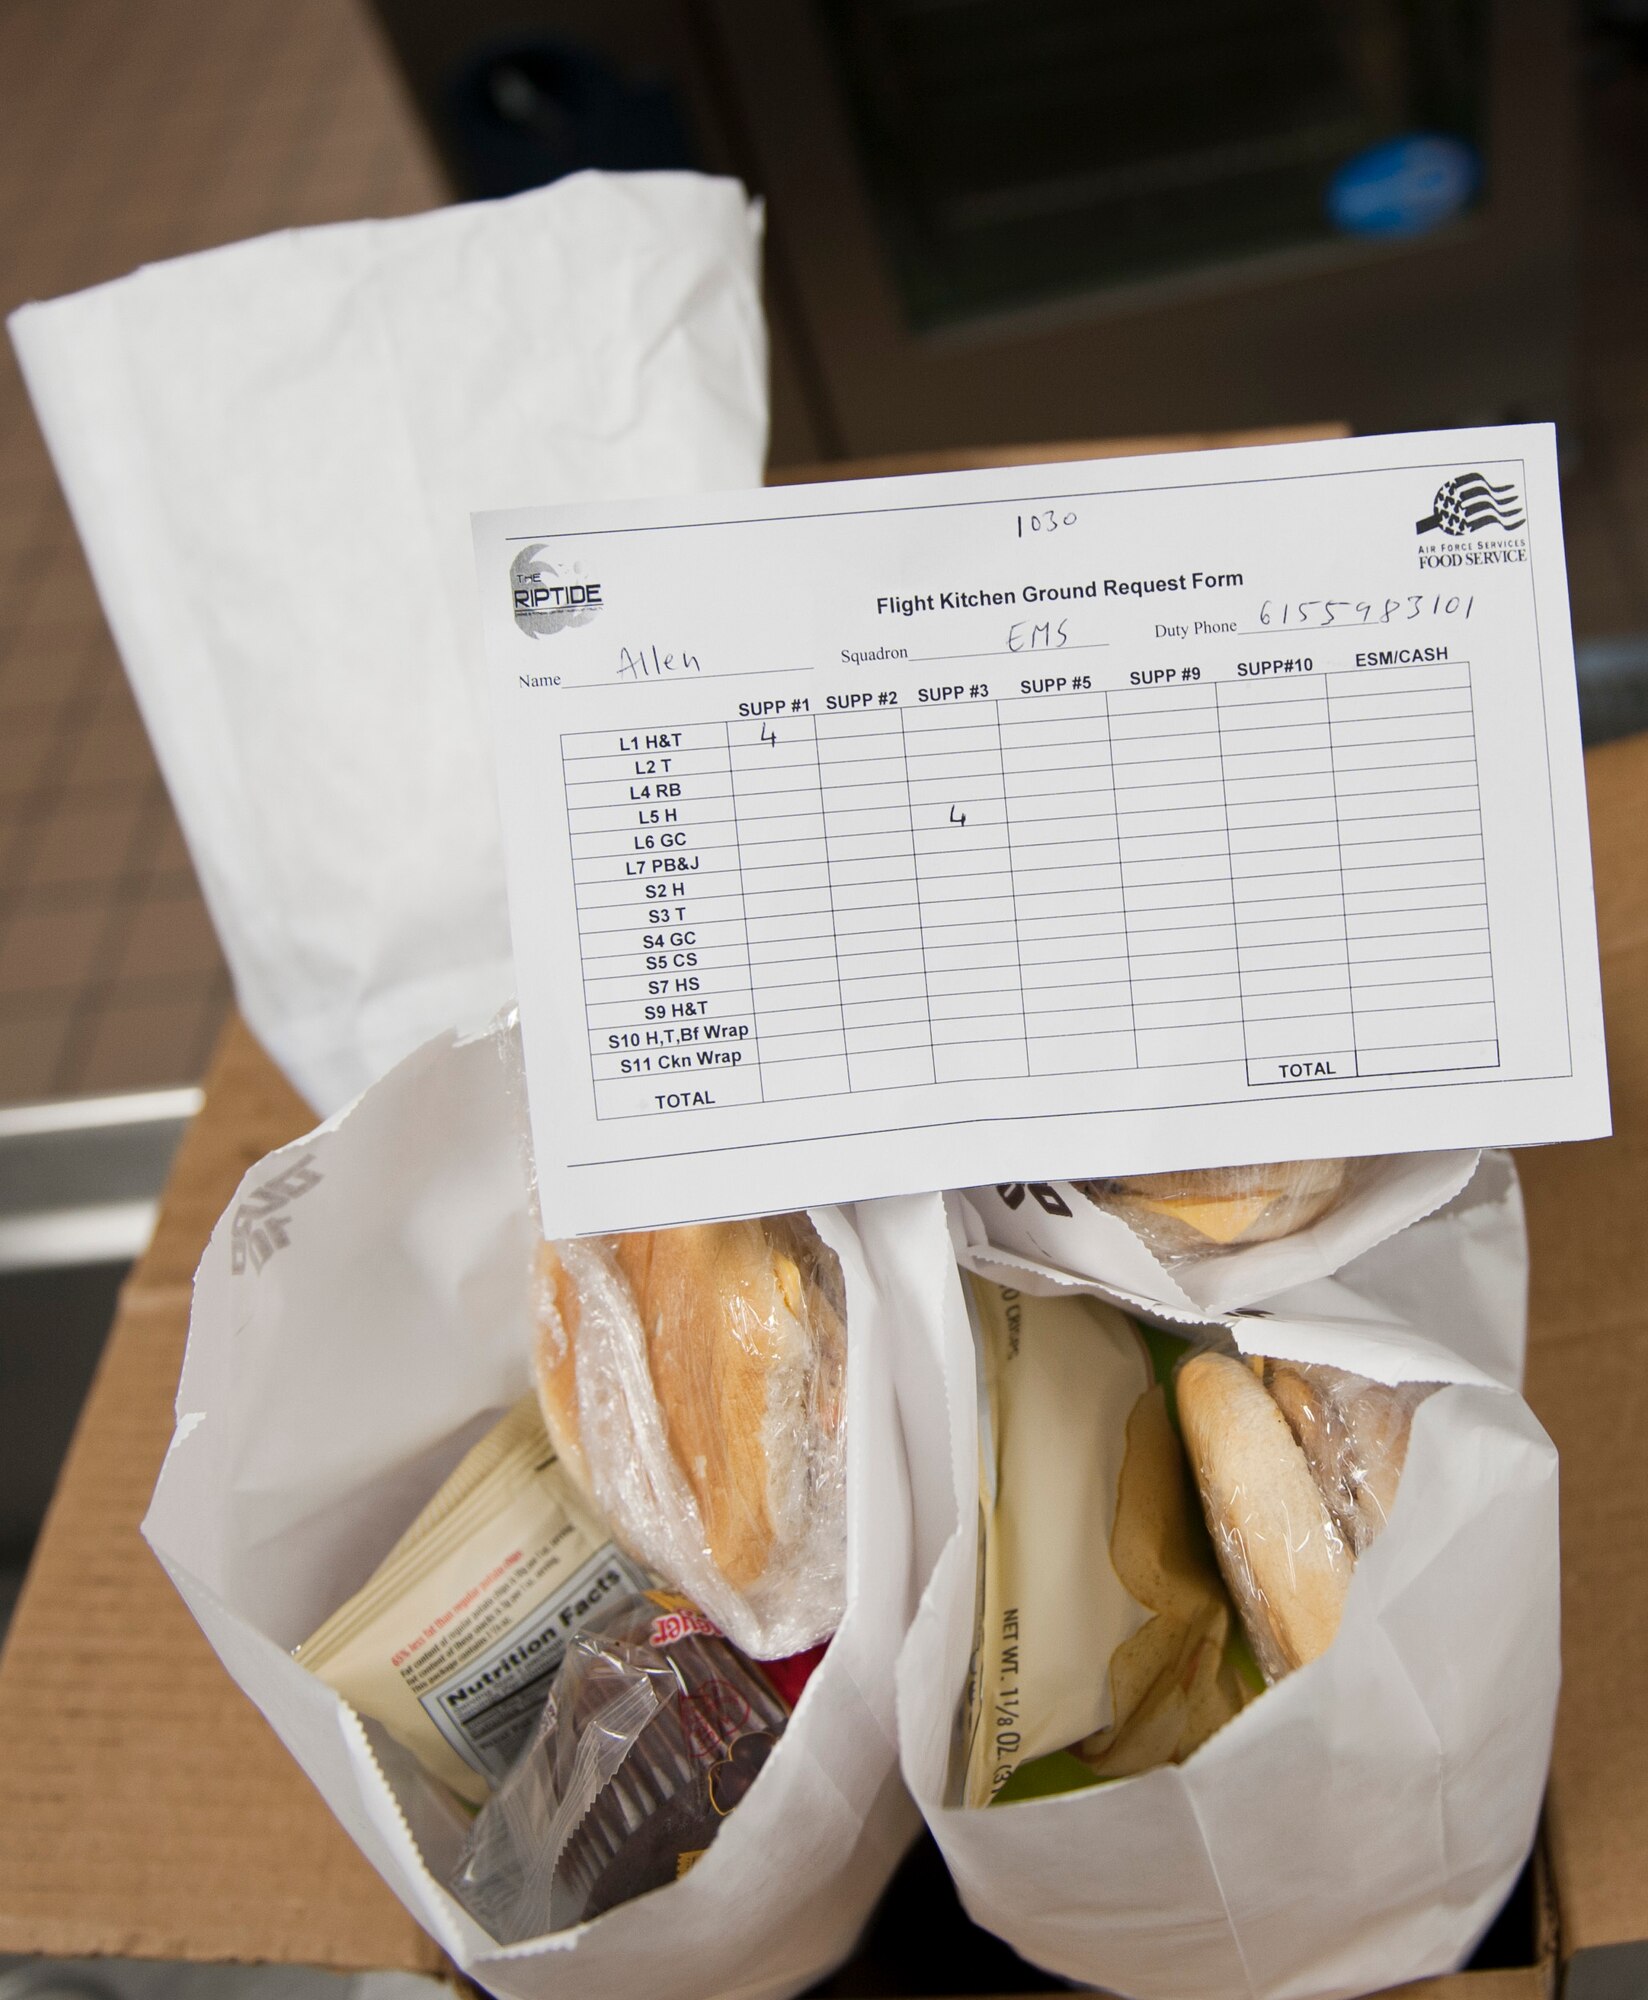 A box of flight meals sits on a counter at the Riptide Dining Facility on Hurlburt Field, Fla., Feb. 6, 2014. Maintainers, aircrew members and Security Forces Airmen order meals from the flight kitchen. (U.S. Air Force photo/Senior Airman Krystal M. Garrett)